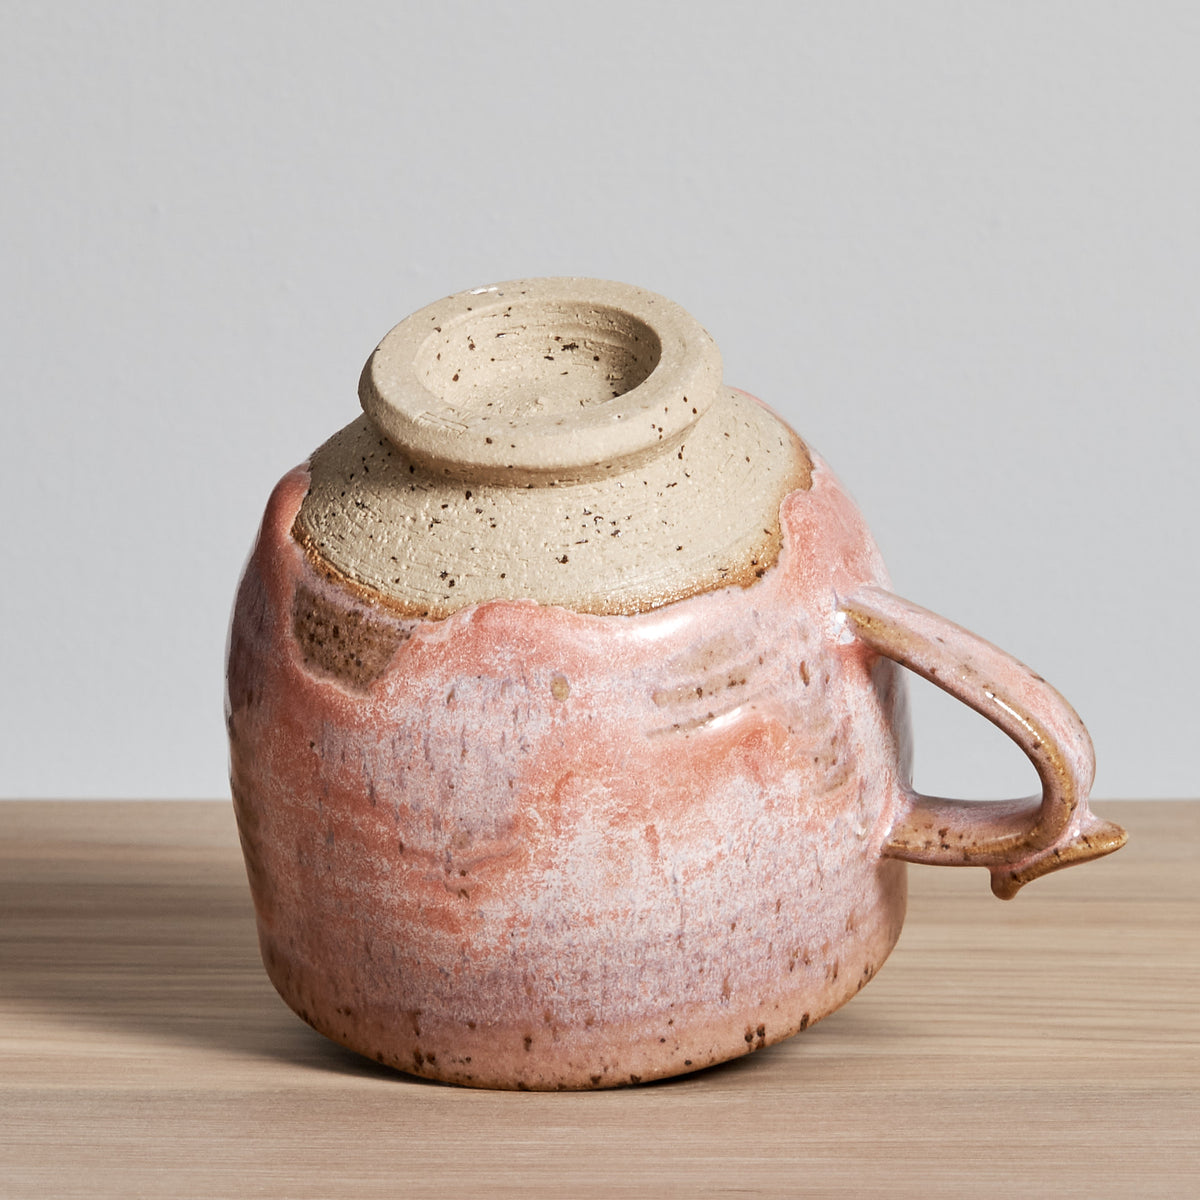 A Bird Handle Cup - Rhubarb by Jino Ceramic Studio on a wooden table.